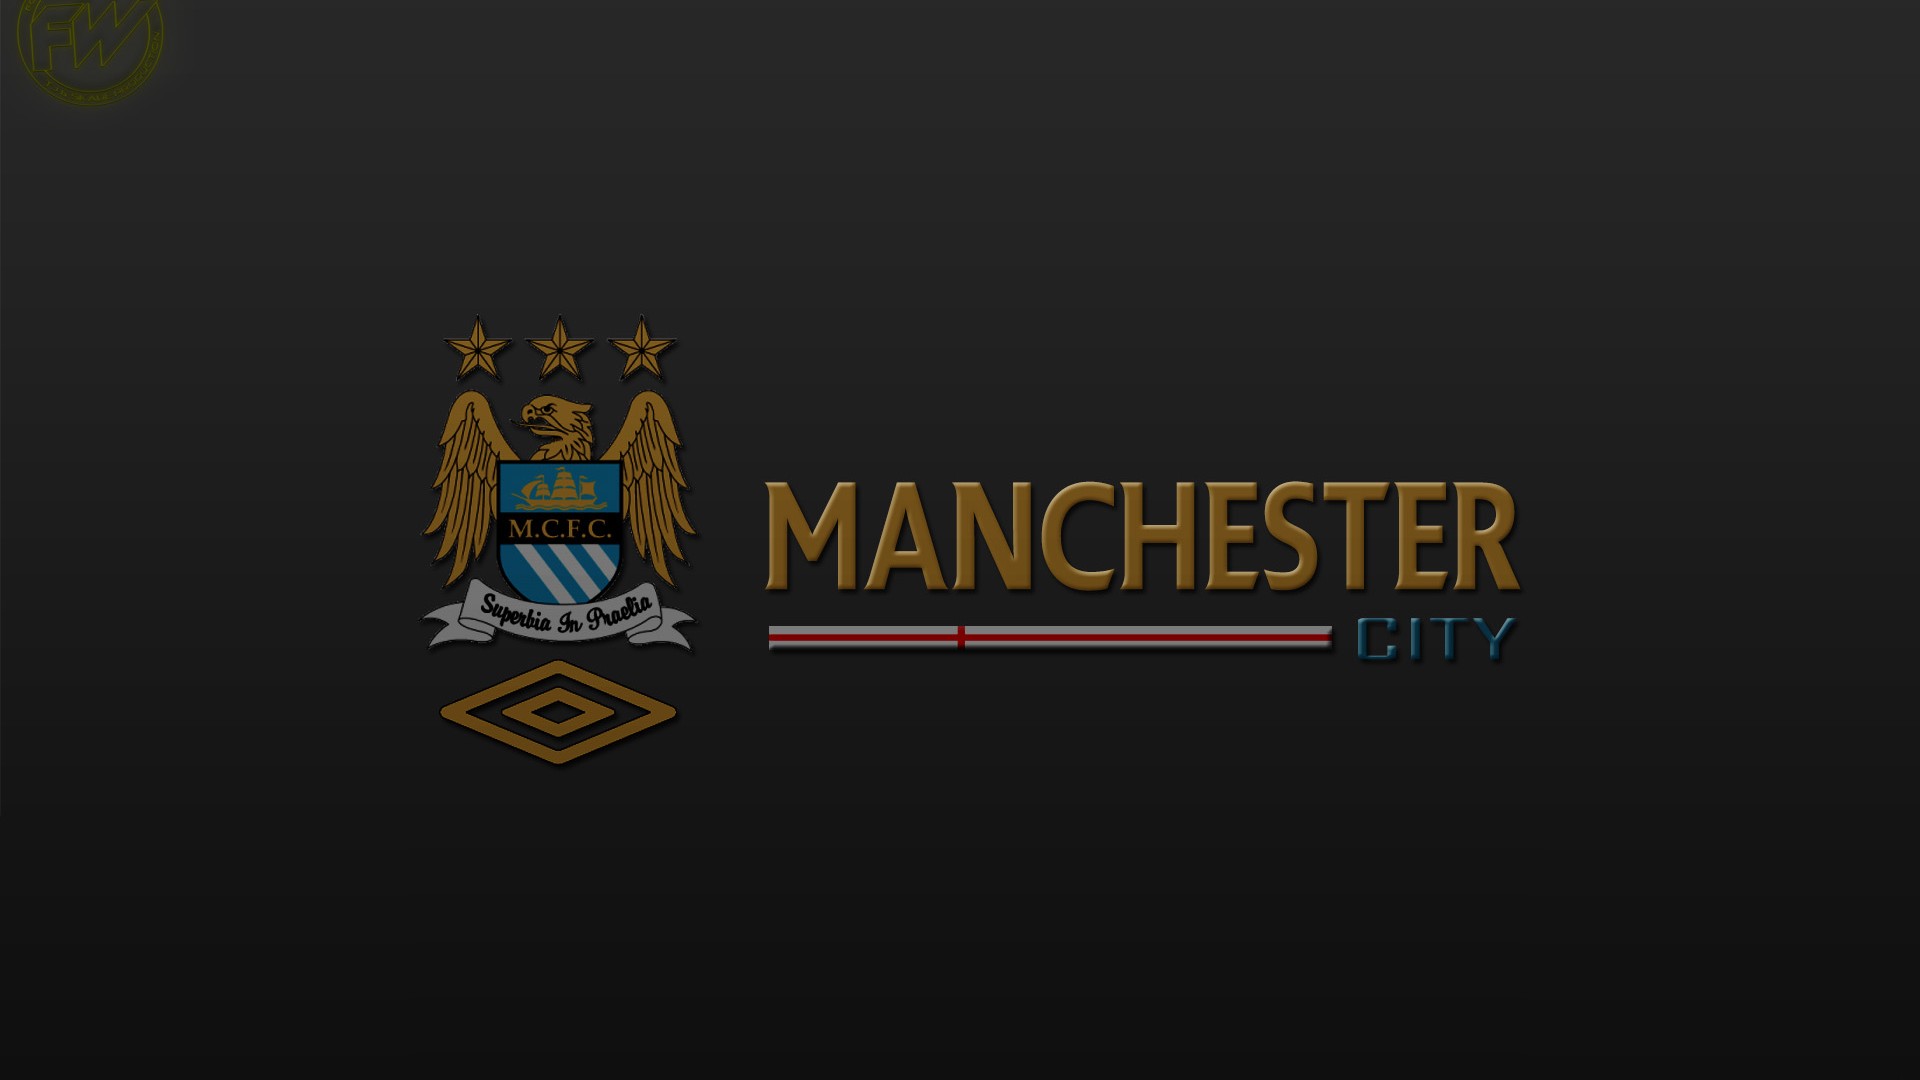 Wallpaper Desktop Manchester City FC HD With high-resolution 1920X1080 pixel. You can use this wallpaper for your Desktop Computers, Mac Screensavers, Windows Backgrounds, iPhone Wallpapers, Tablet or Android Lock screen and another Mobile device